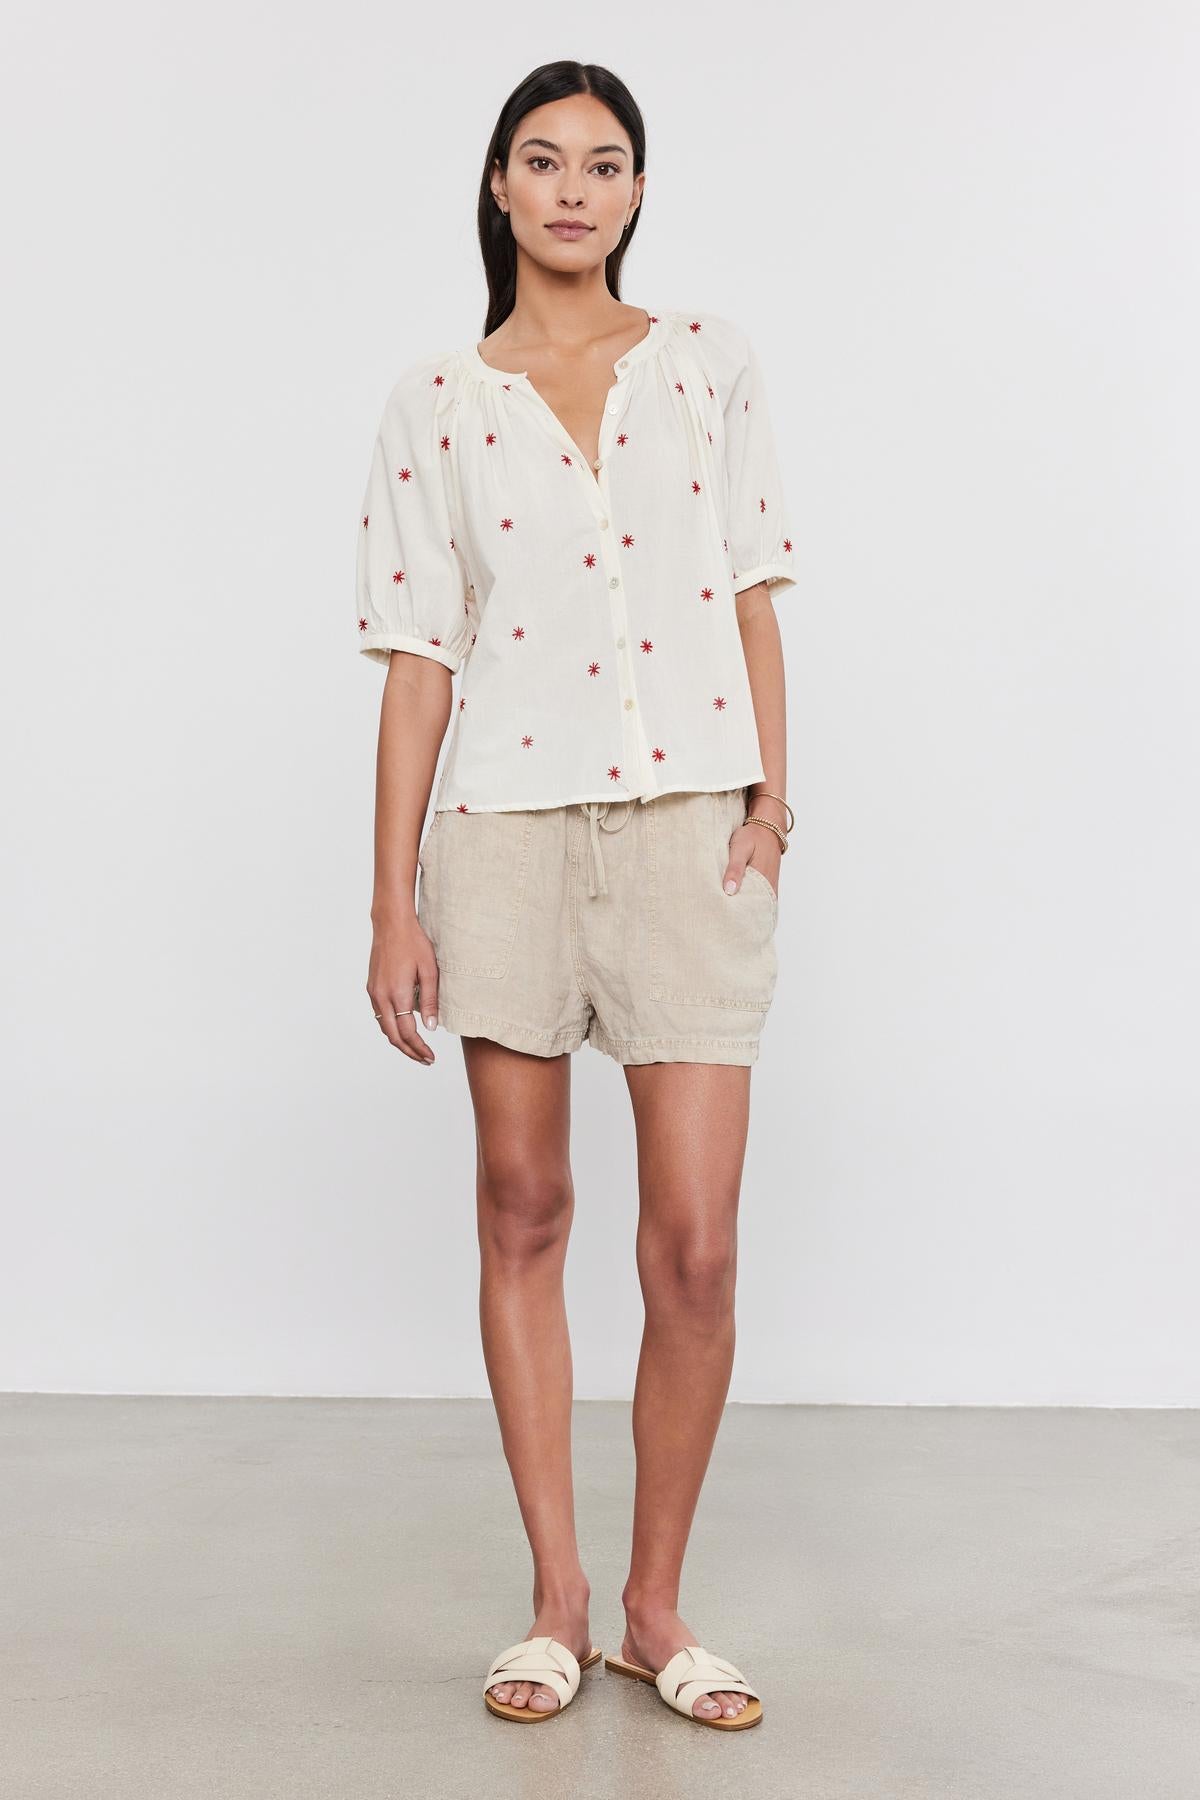 A woman standing in a studio, wearing a white polka-dot Amira top with floral embroidery, beige shorts, and white sandals by Velvet by Graham & Spencer.-36910000275649